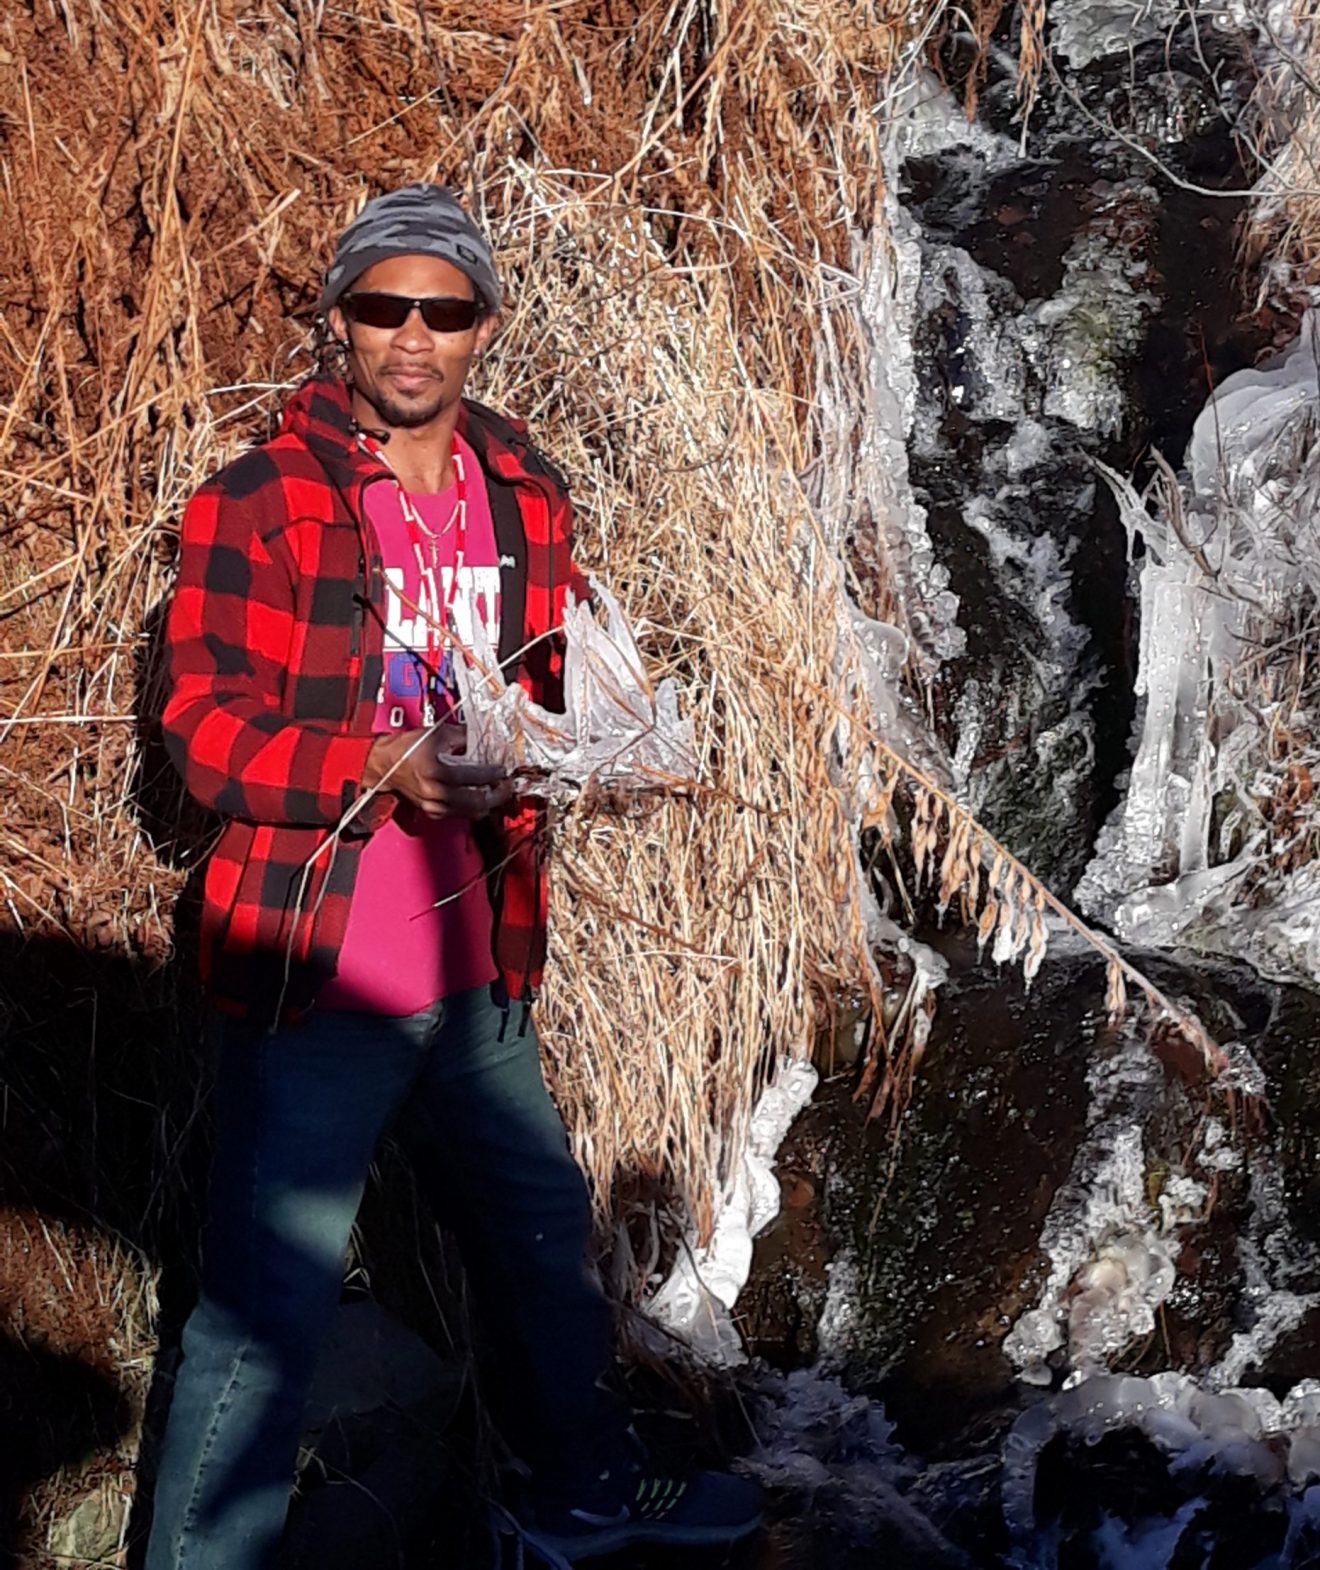 Man wearing sunglasses standing near what seems to be a frozen waterfall.